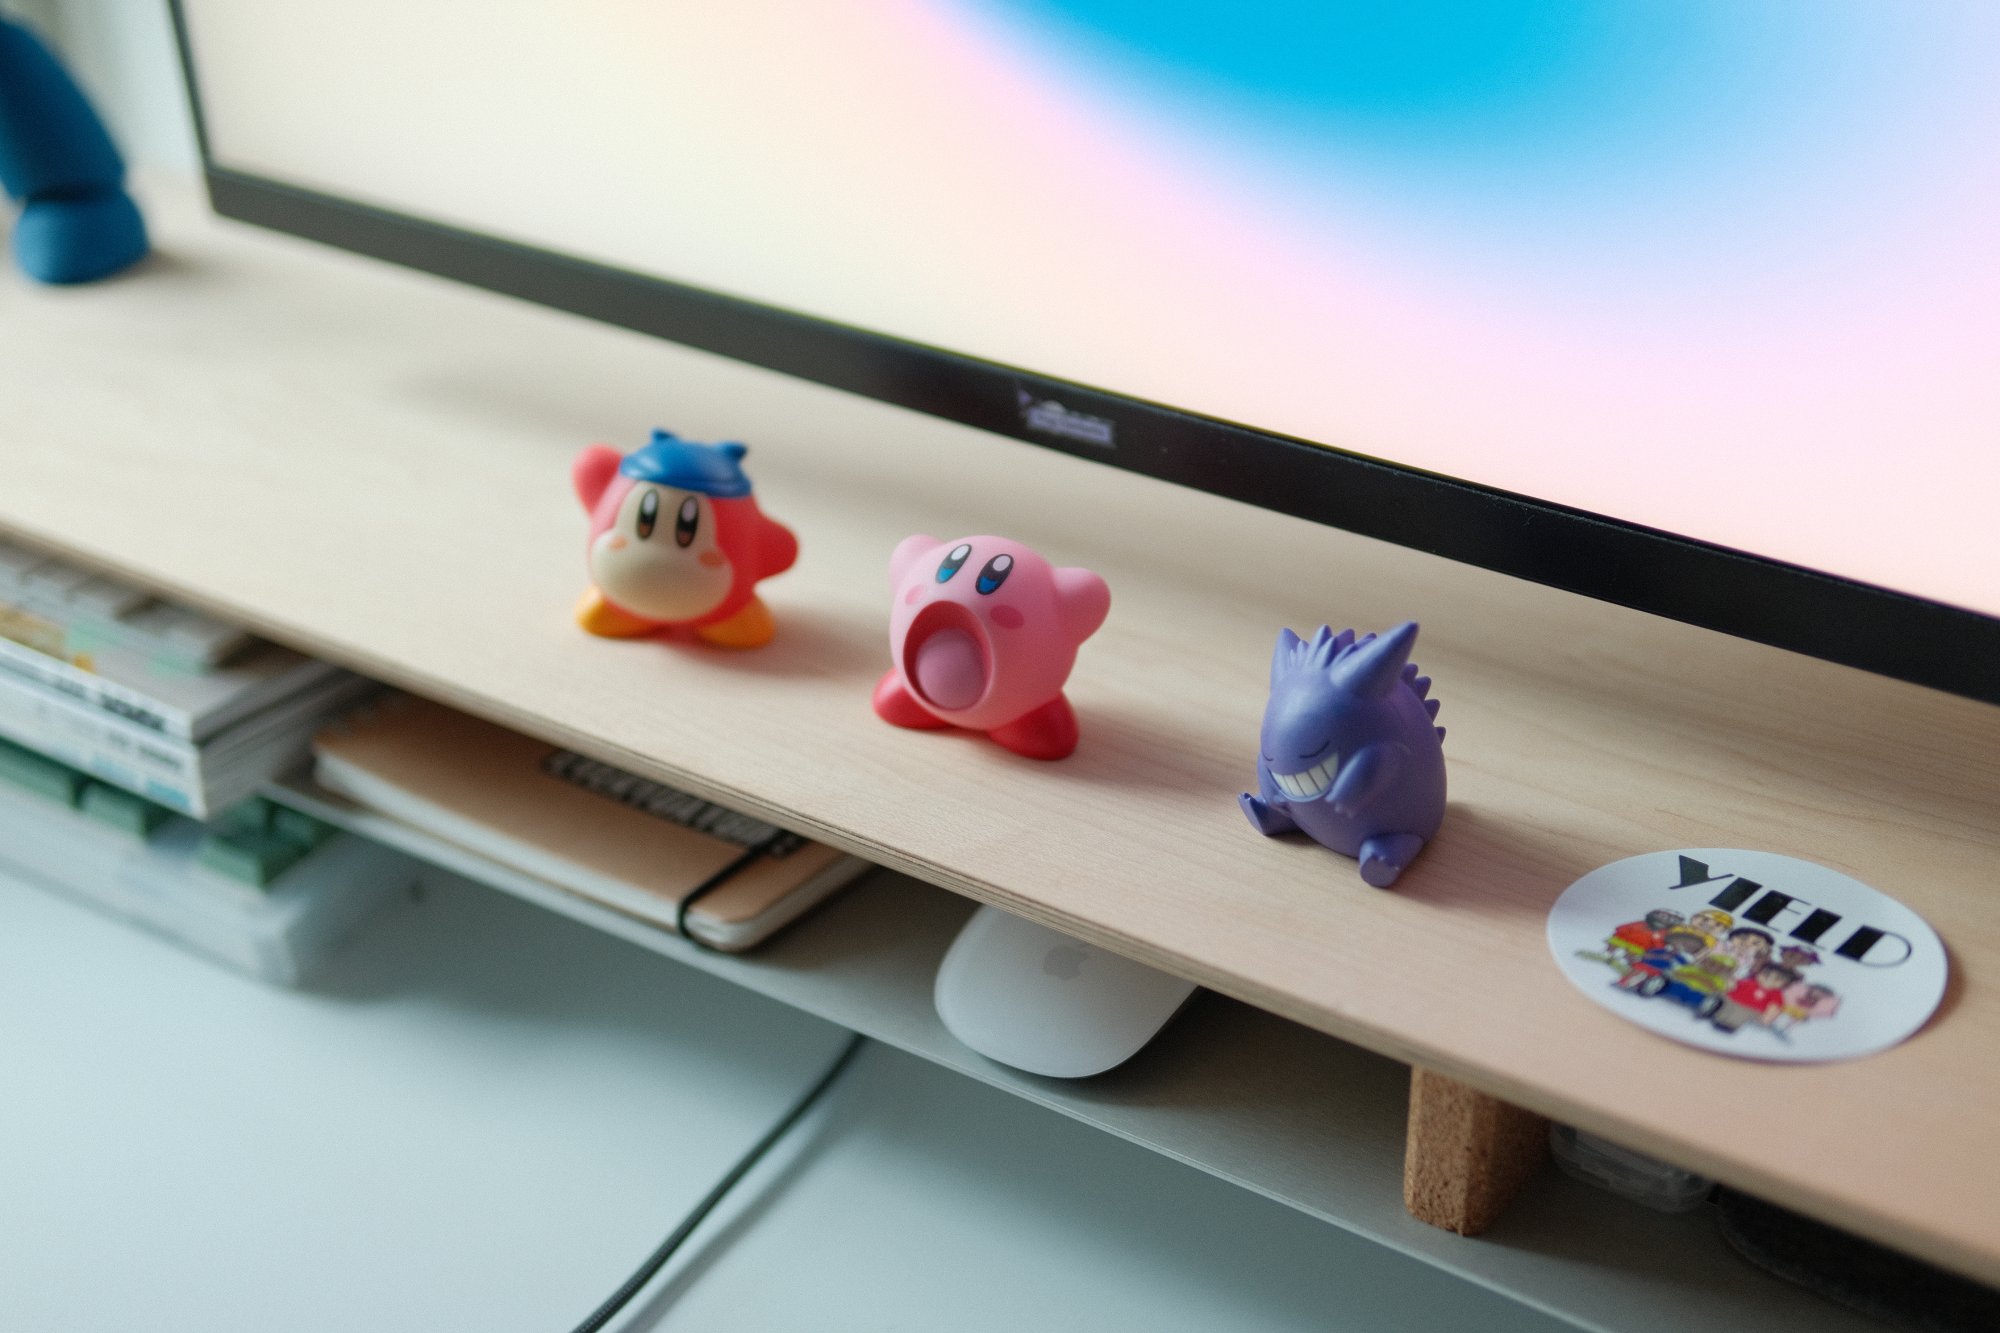 Three soft vinyl figures of characters from Nintendo's Kirby video game series are lined up on a Grovemade Maple desk shelf